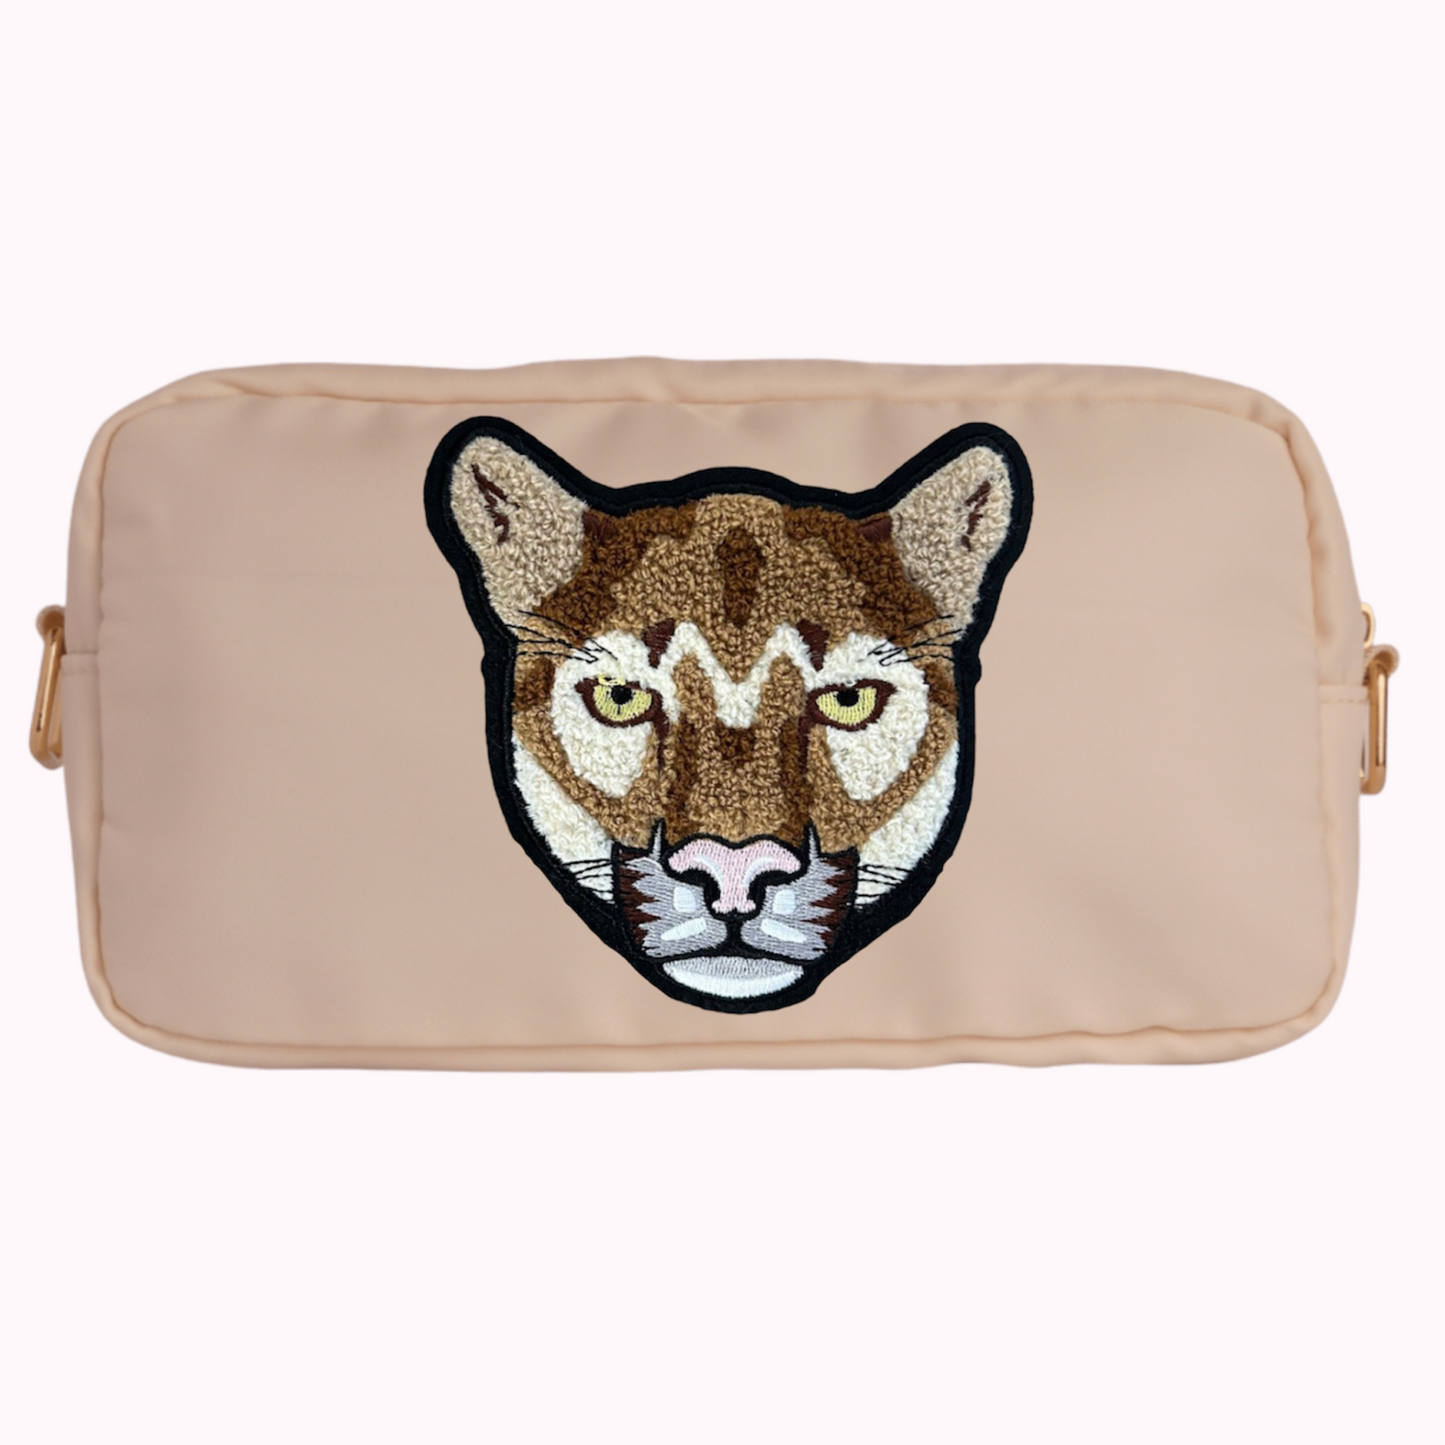 Cream classic crossbody bag with cougar patch. 